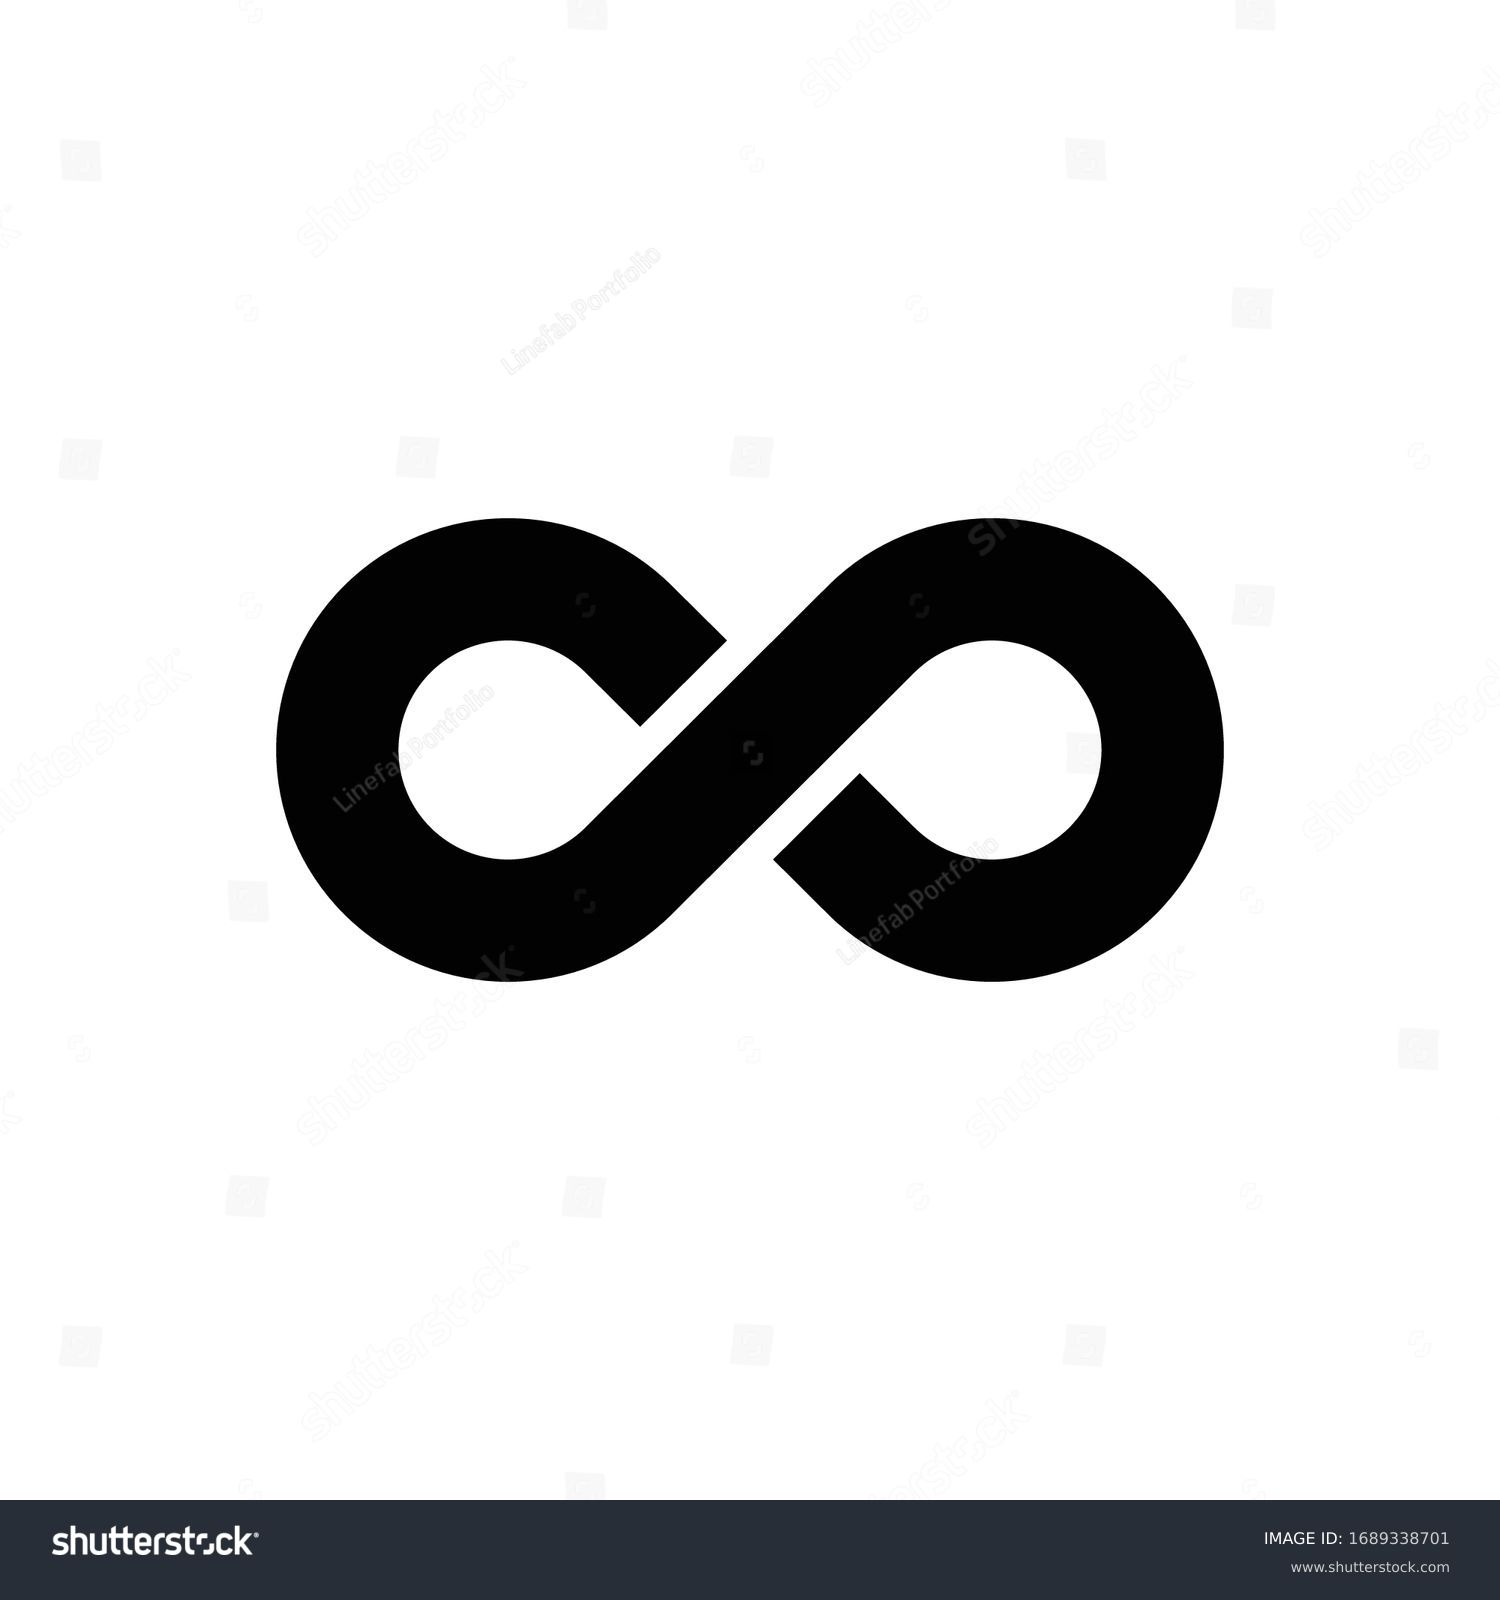 Infinity Icon for Graphic Design Projects
 #1689338701